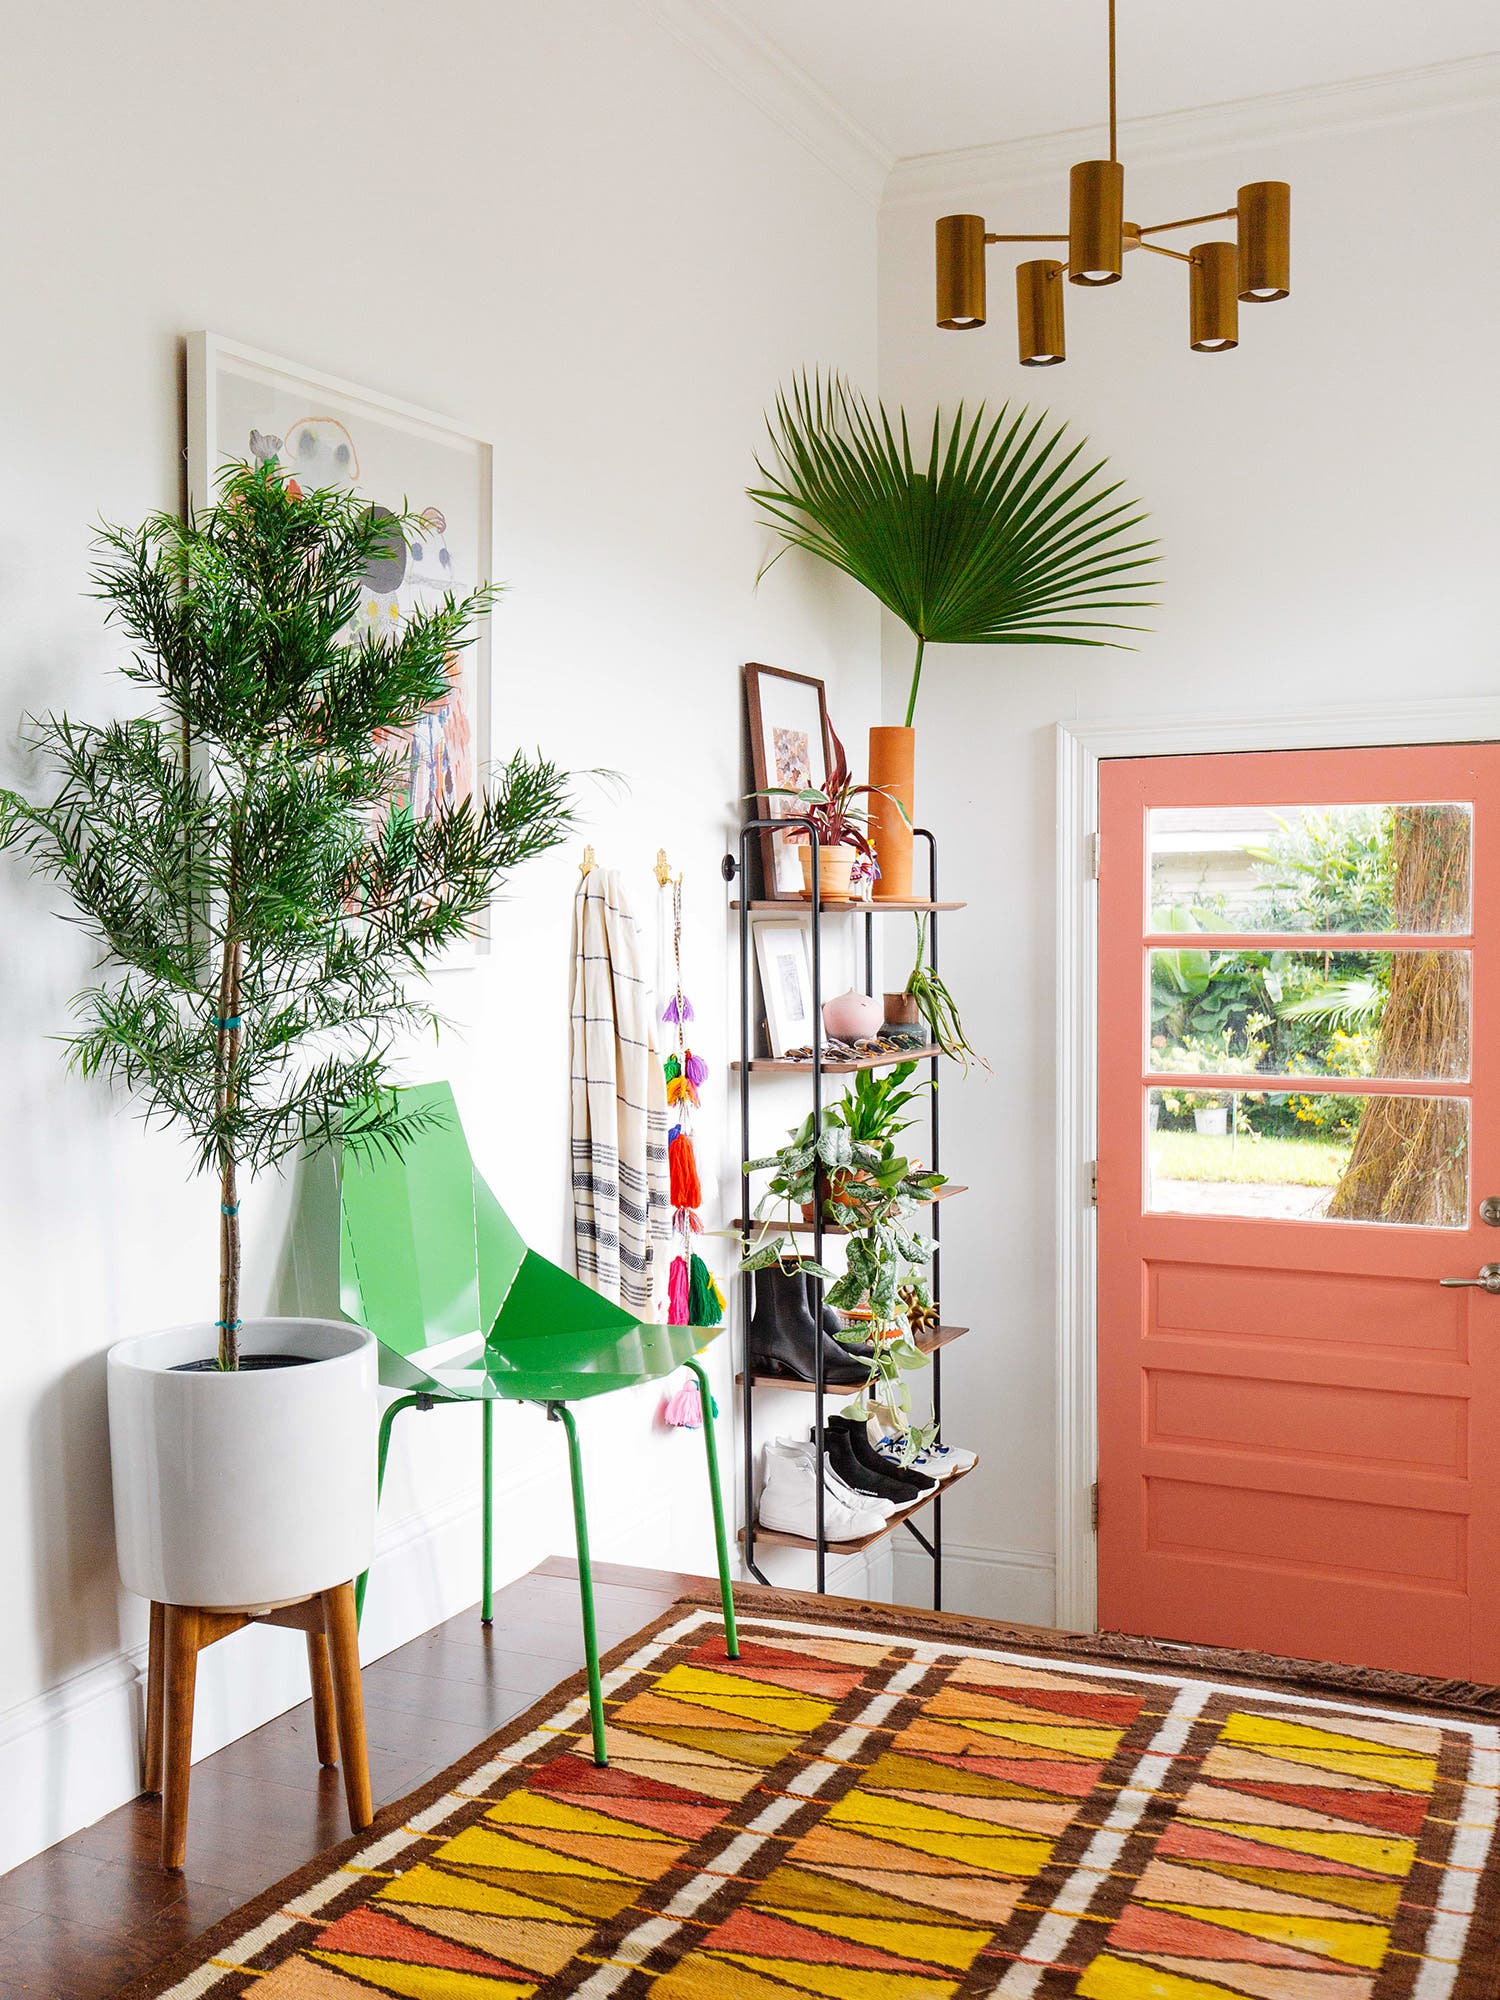 6 Indoor Garden Ideas That Will Convince You to Become a Plant Person